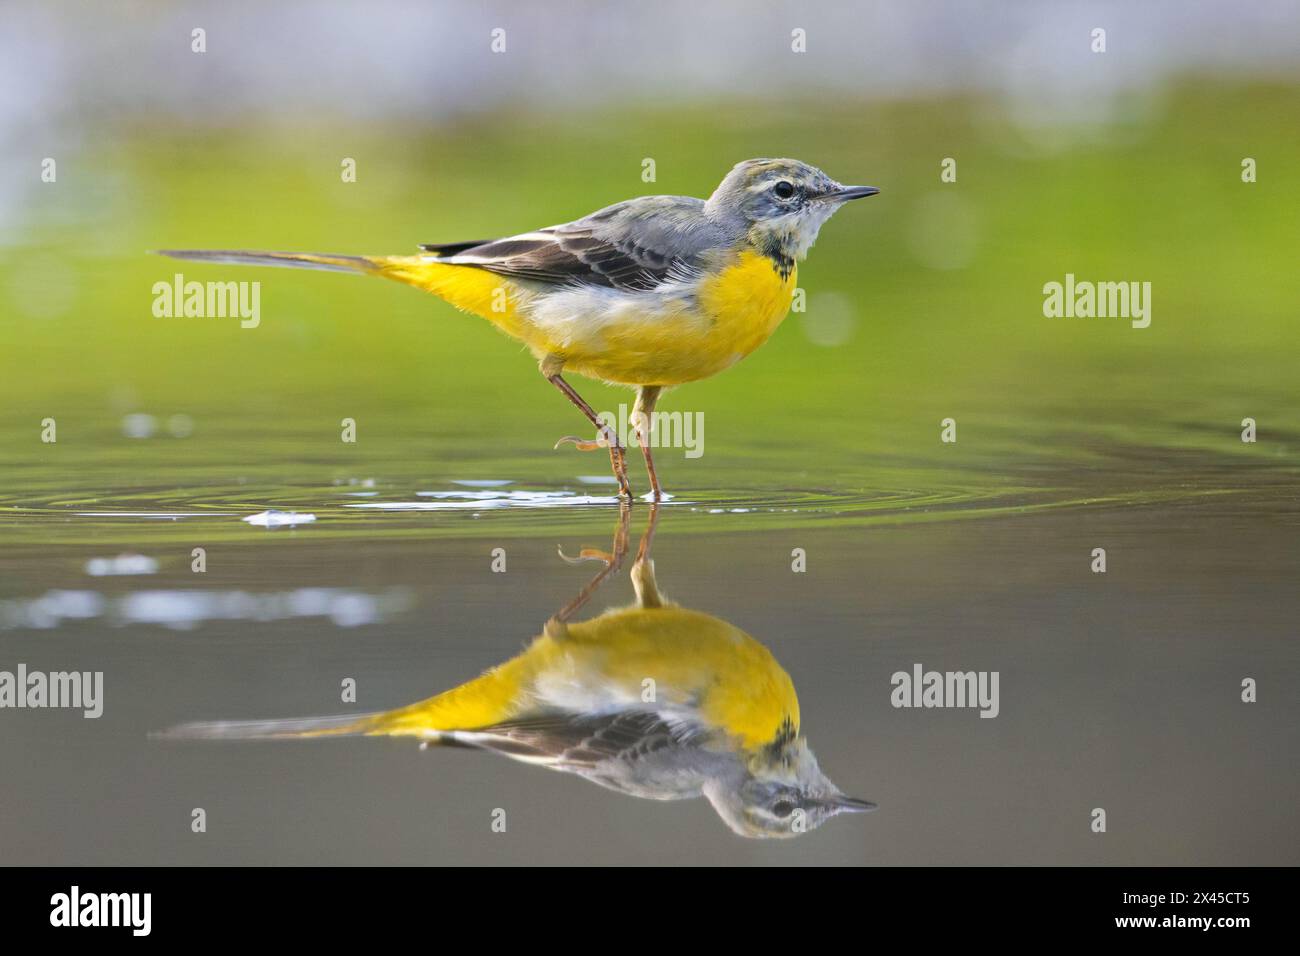 Grey wagtail (Motacilla cinerea) in winter plumage showing reflection in shallow water of stream, Germany Stock Photo